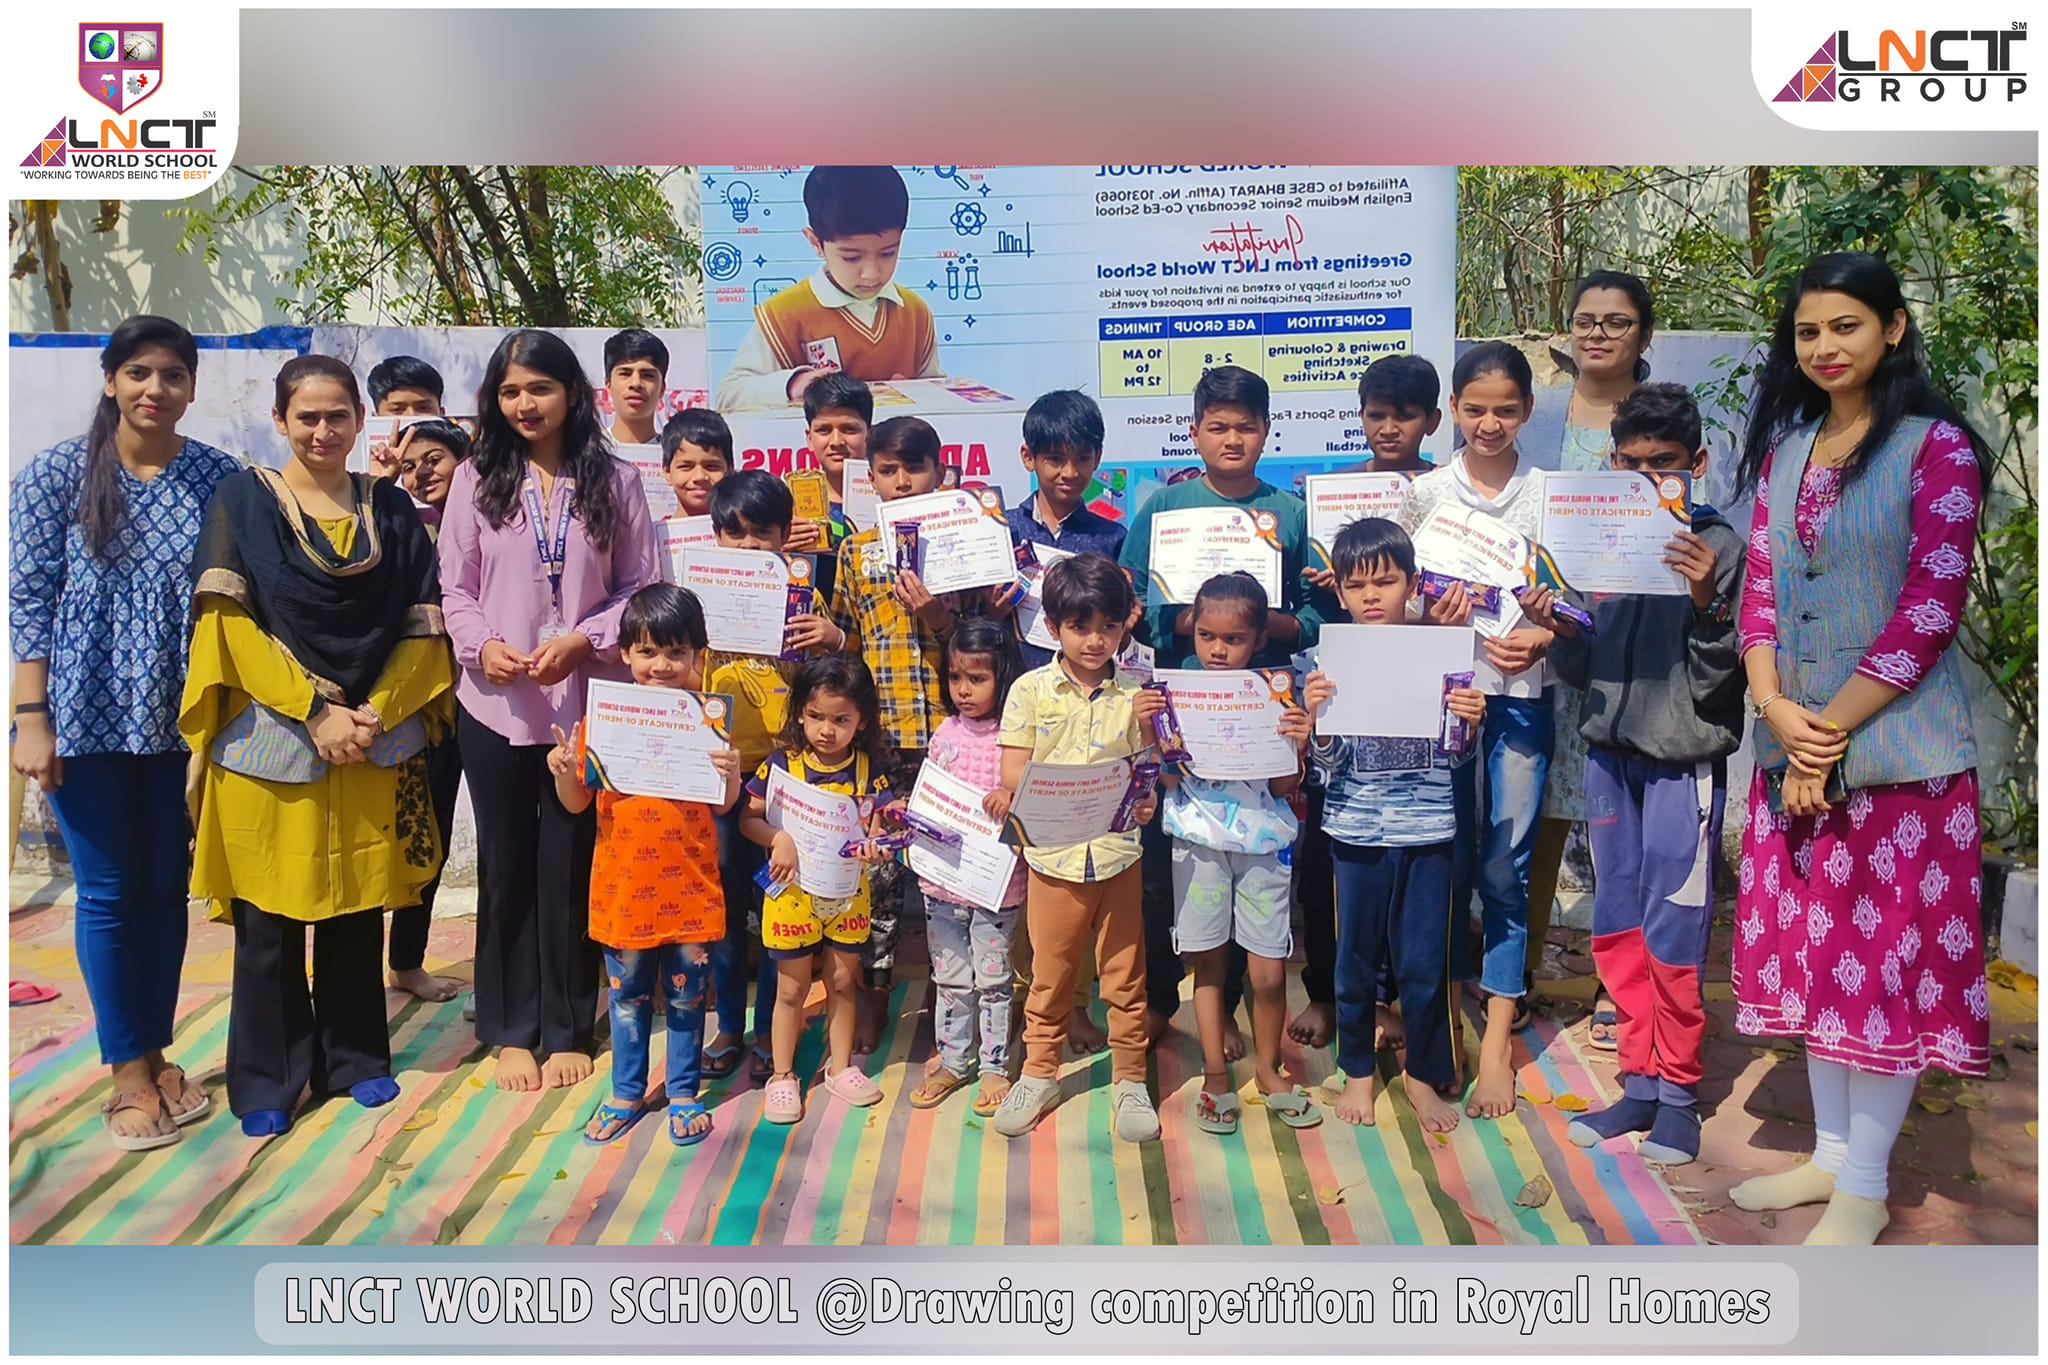 LNCT WORLD SCHOOL BHOPAL organised DRAWING COMPETITION in residential campus ROYAL HOMES